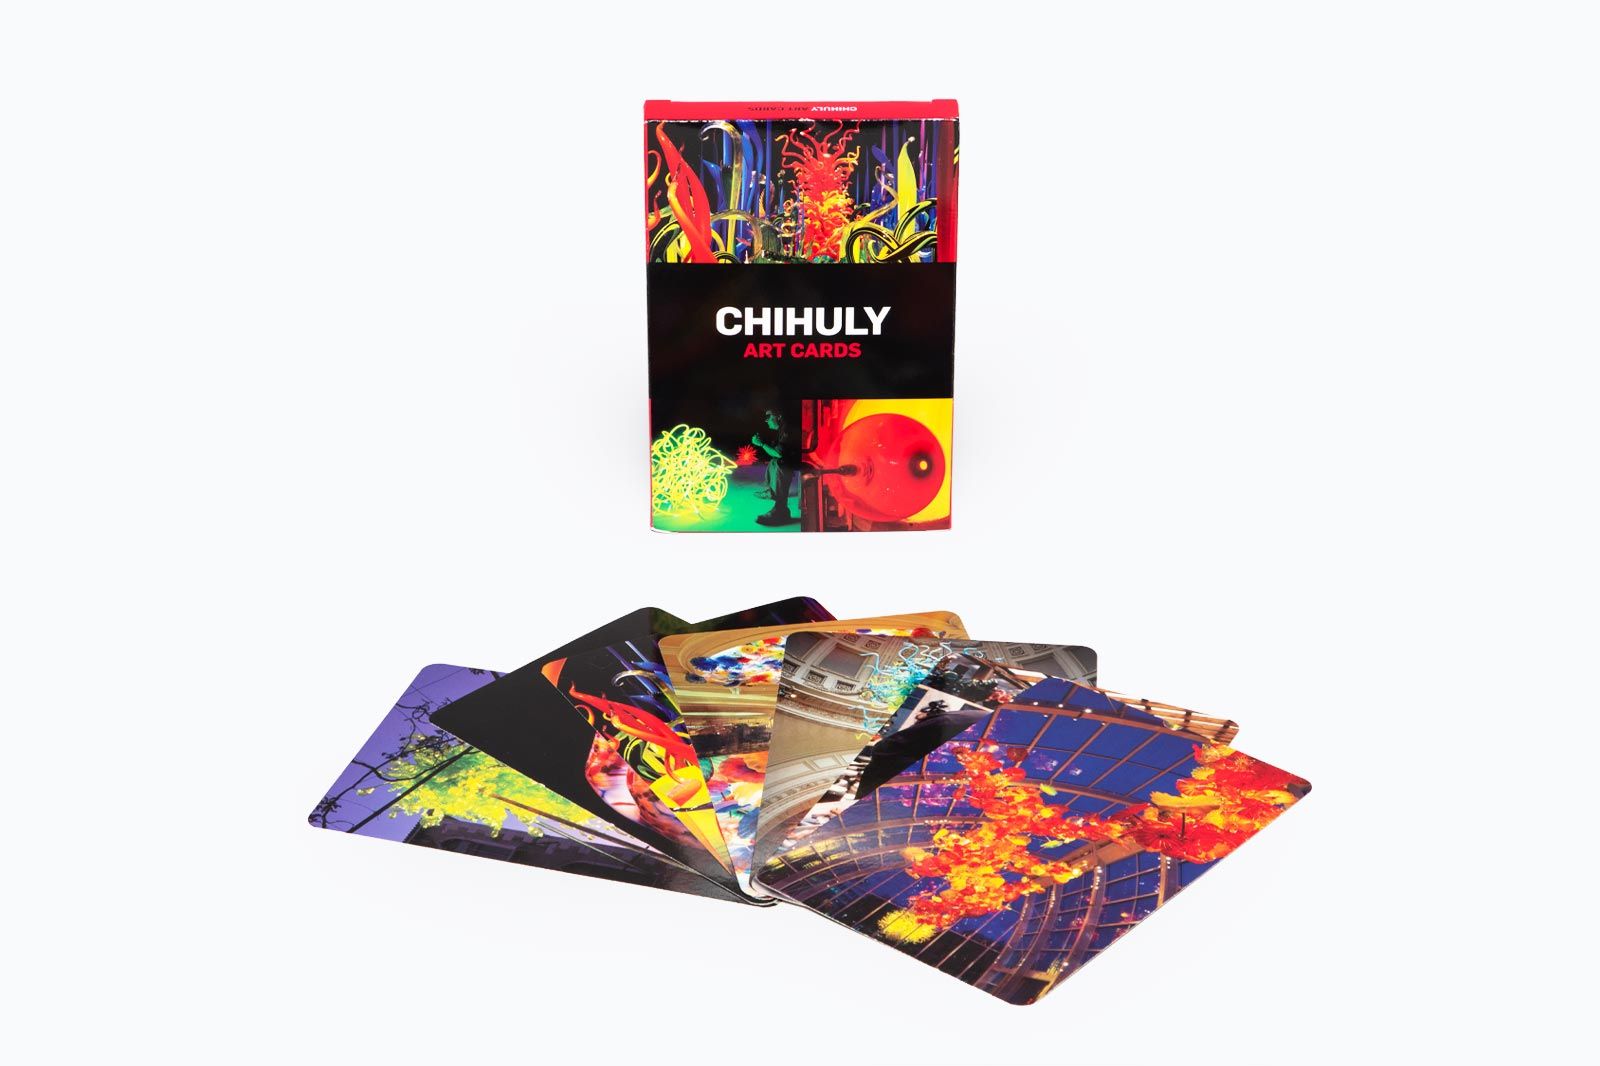 Chihuly Art Cards